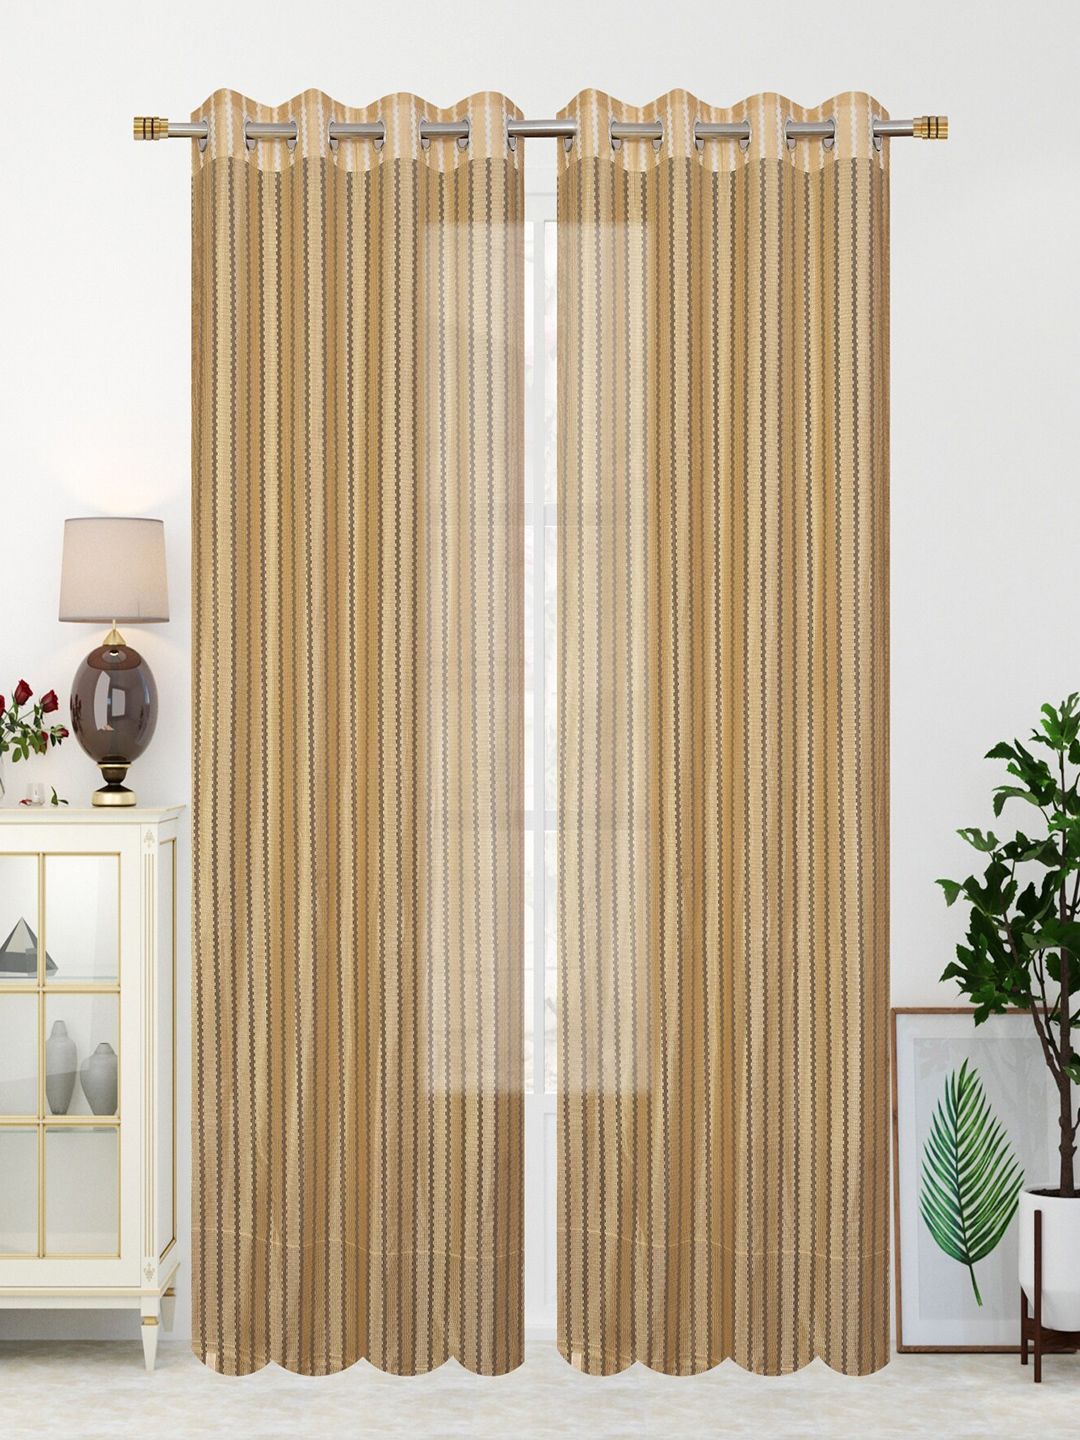 Homefab India Gold-Toned Set of 2 Sheer Long Door Curtain Price in India